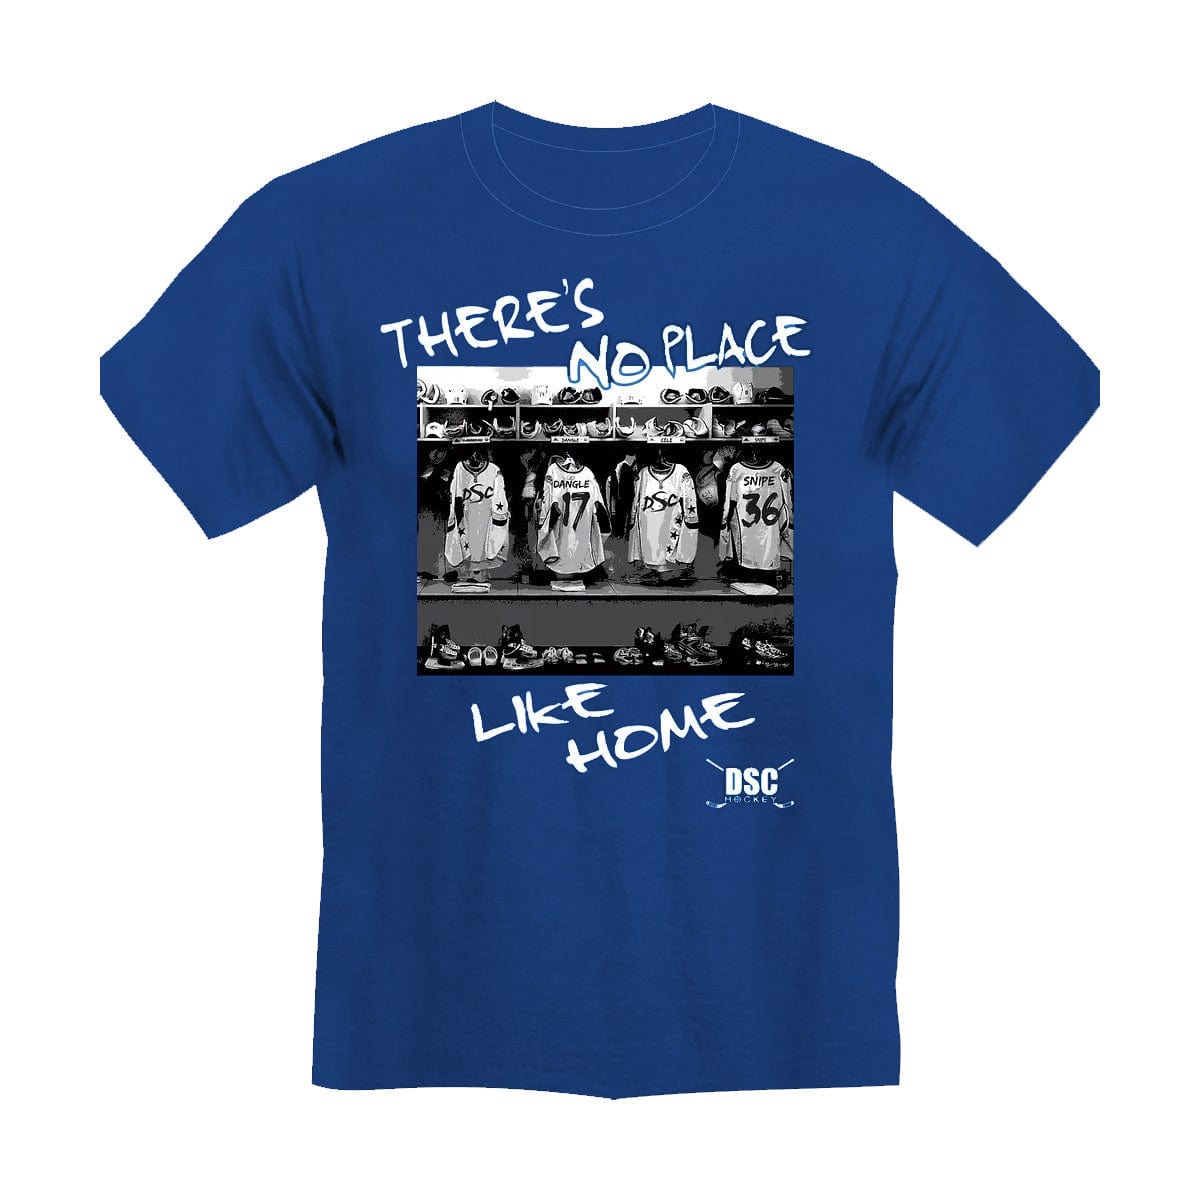 DSC Hockey No Place Youth Shirt - The Hockey Shop Source For Sports